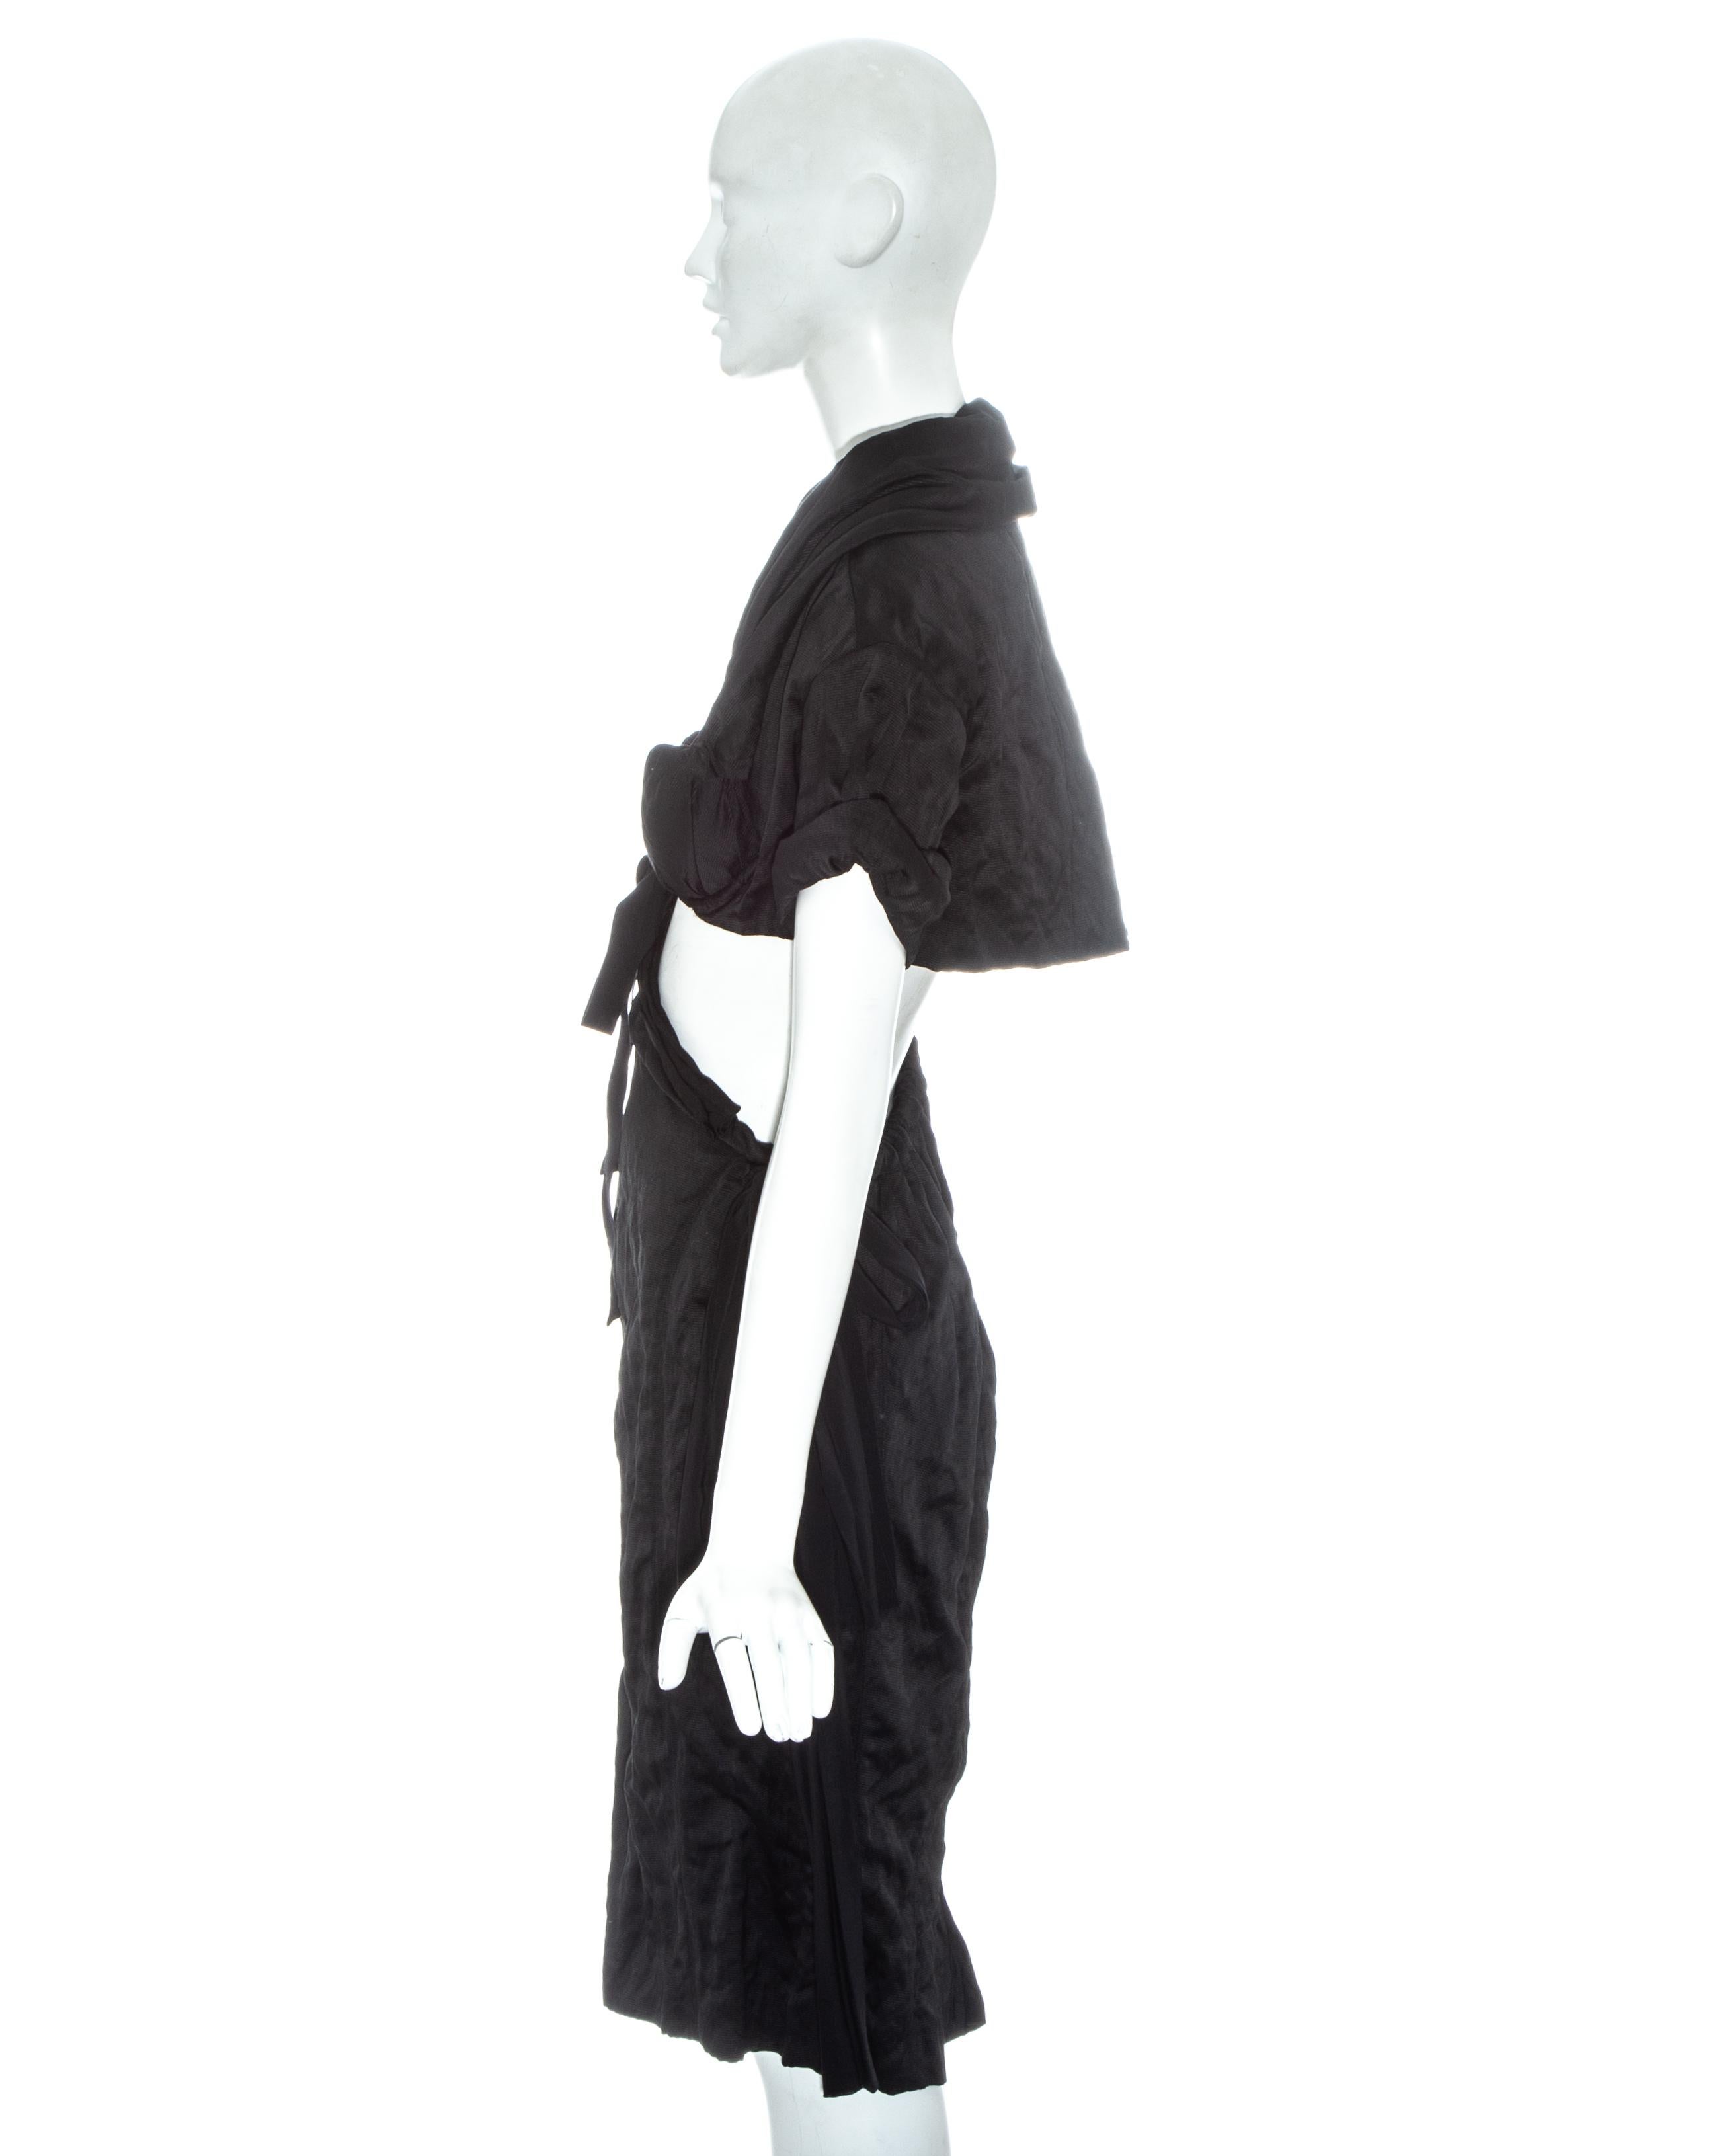 Black Prada black crinkled dress with cut-out and attached bra, ss 2009